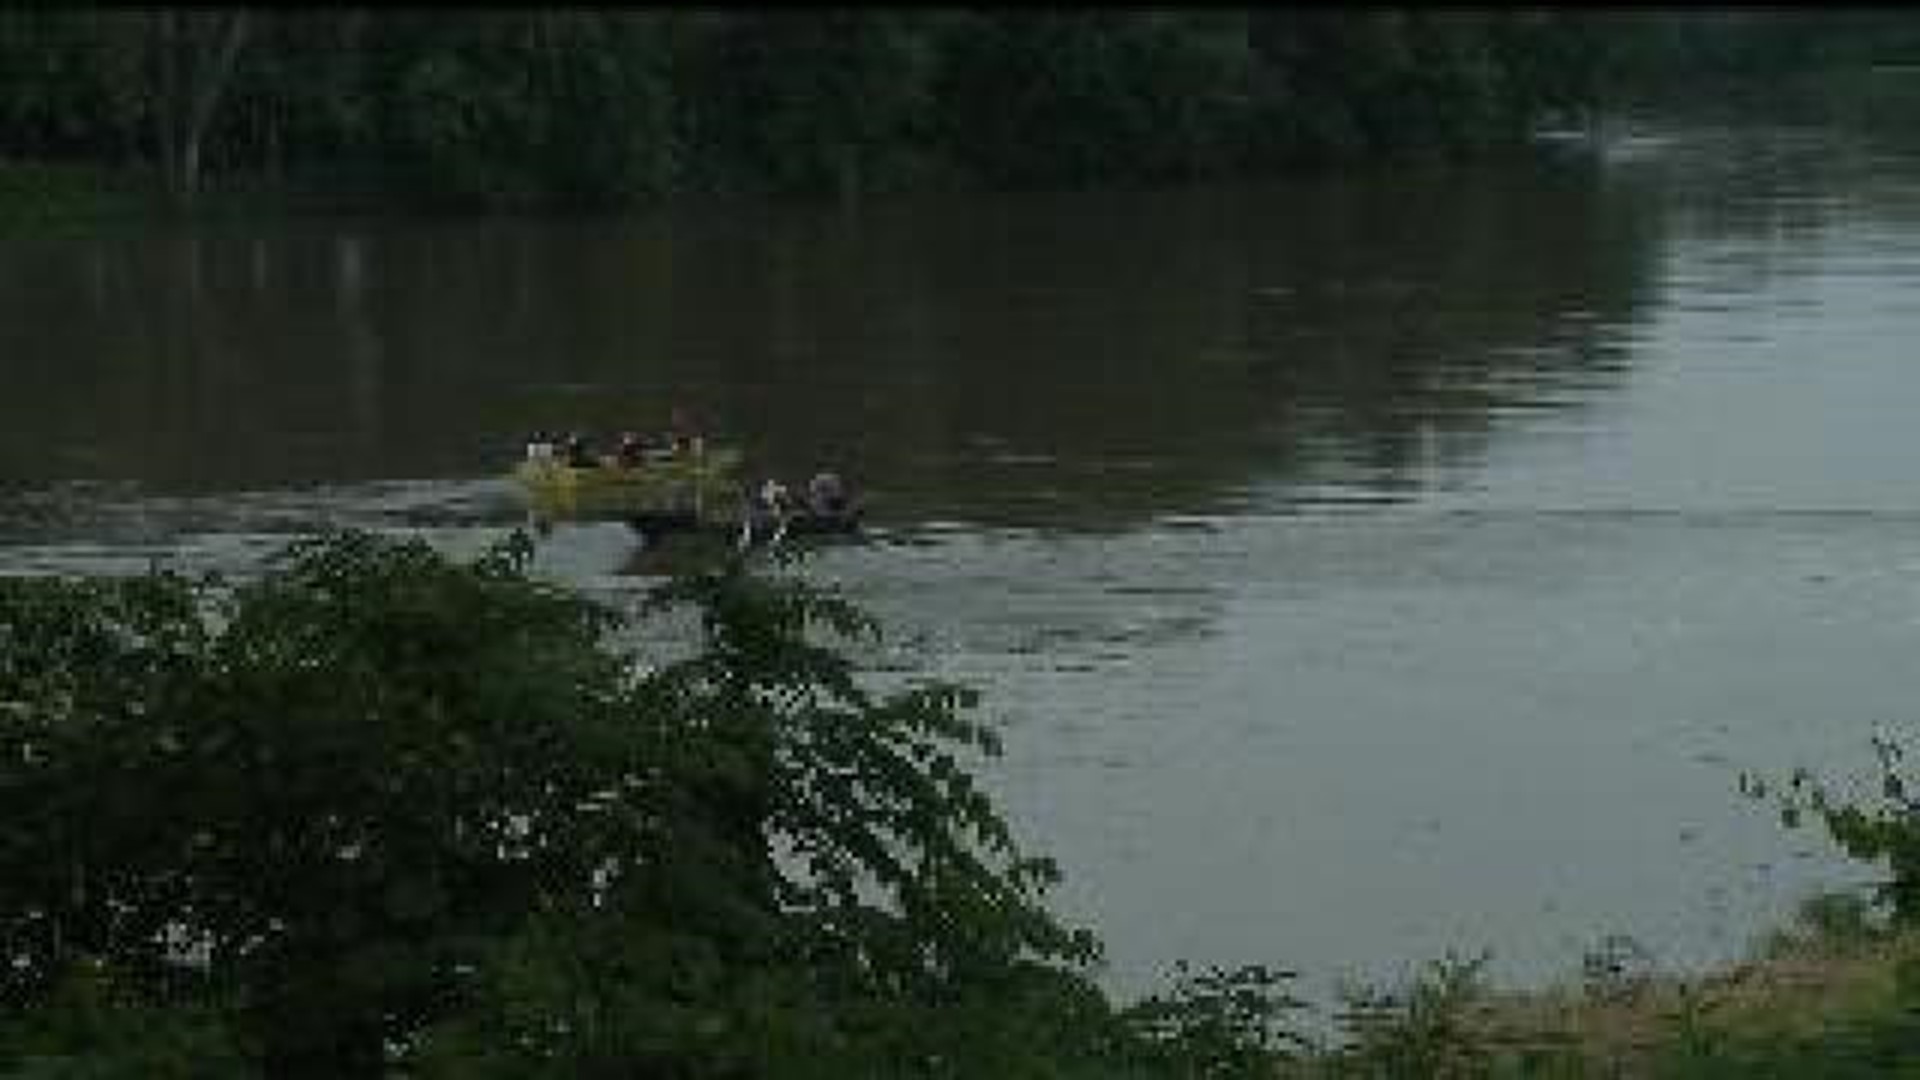 Body found in Rock River